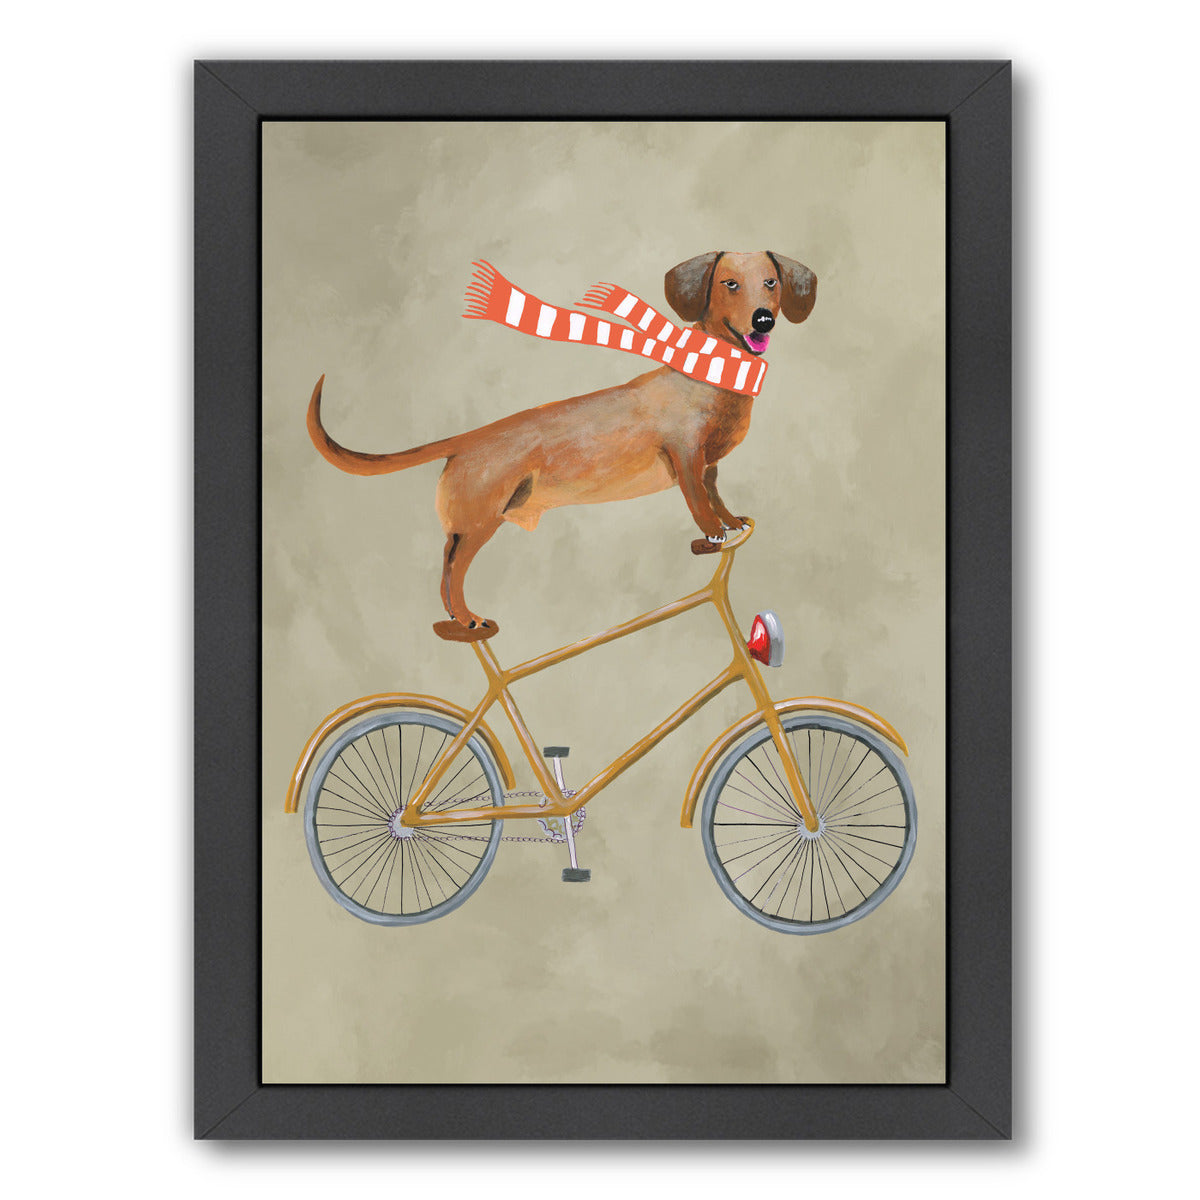 Daschund On Bicycle By Coco De Paris - Black Framed Print - Wall Art - Americanflat